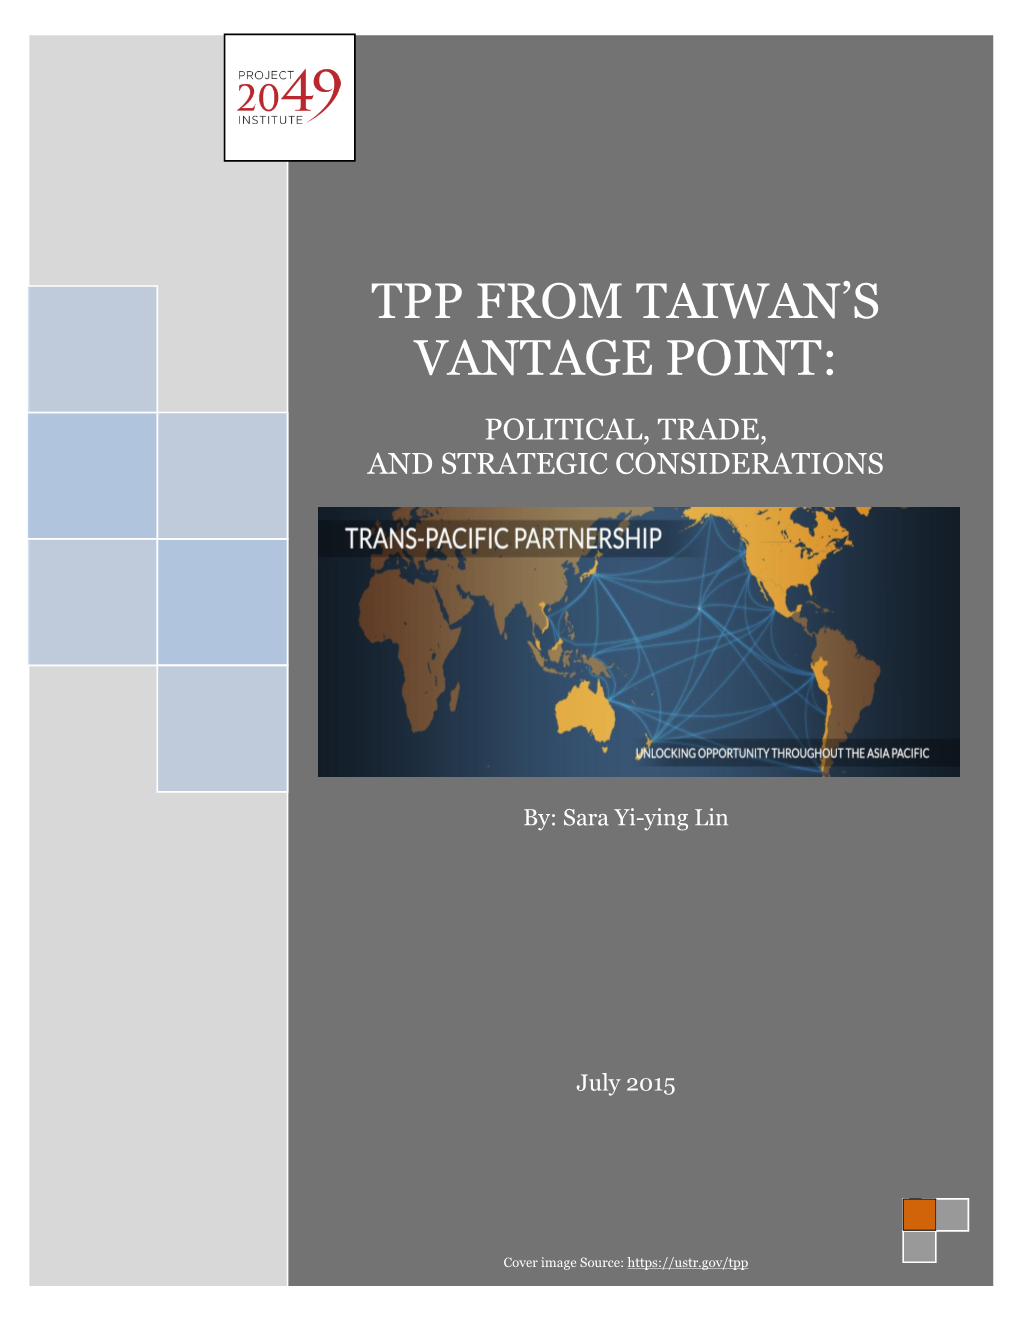 TPP from Taiwan's Vantage Point: Political, Trade, and Strategic